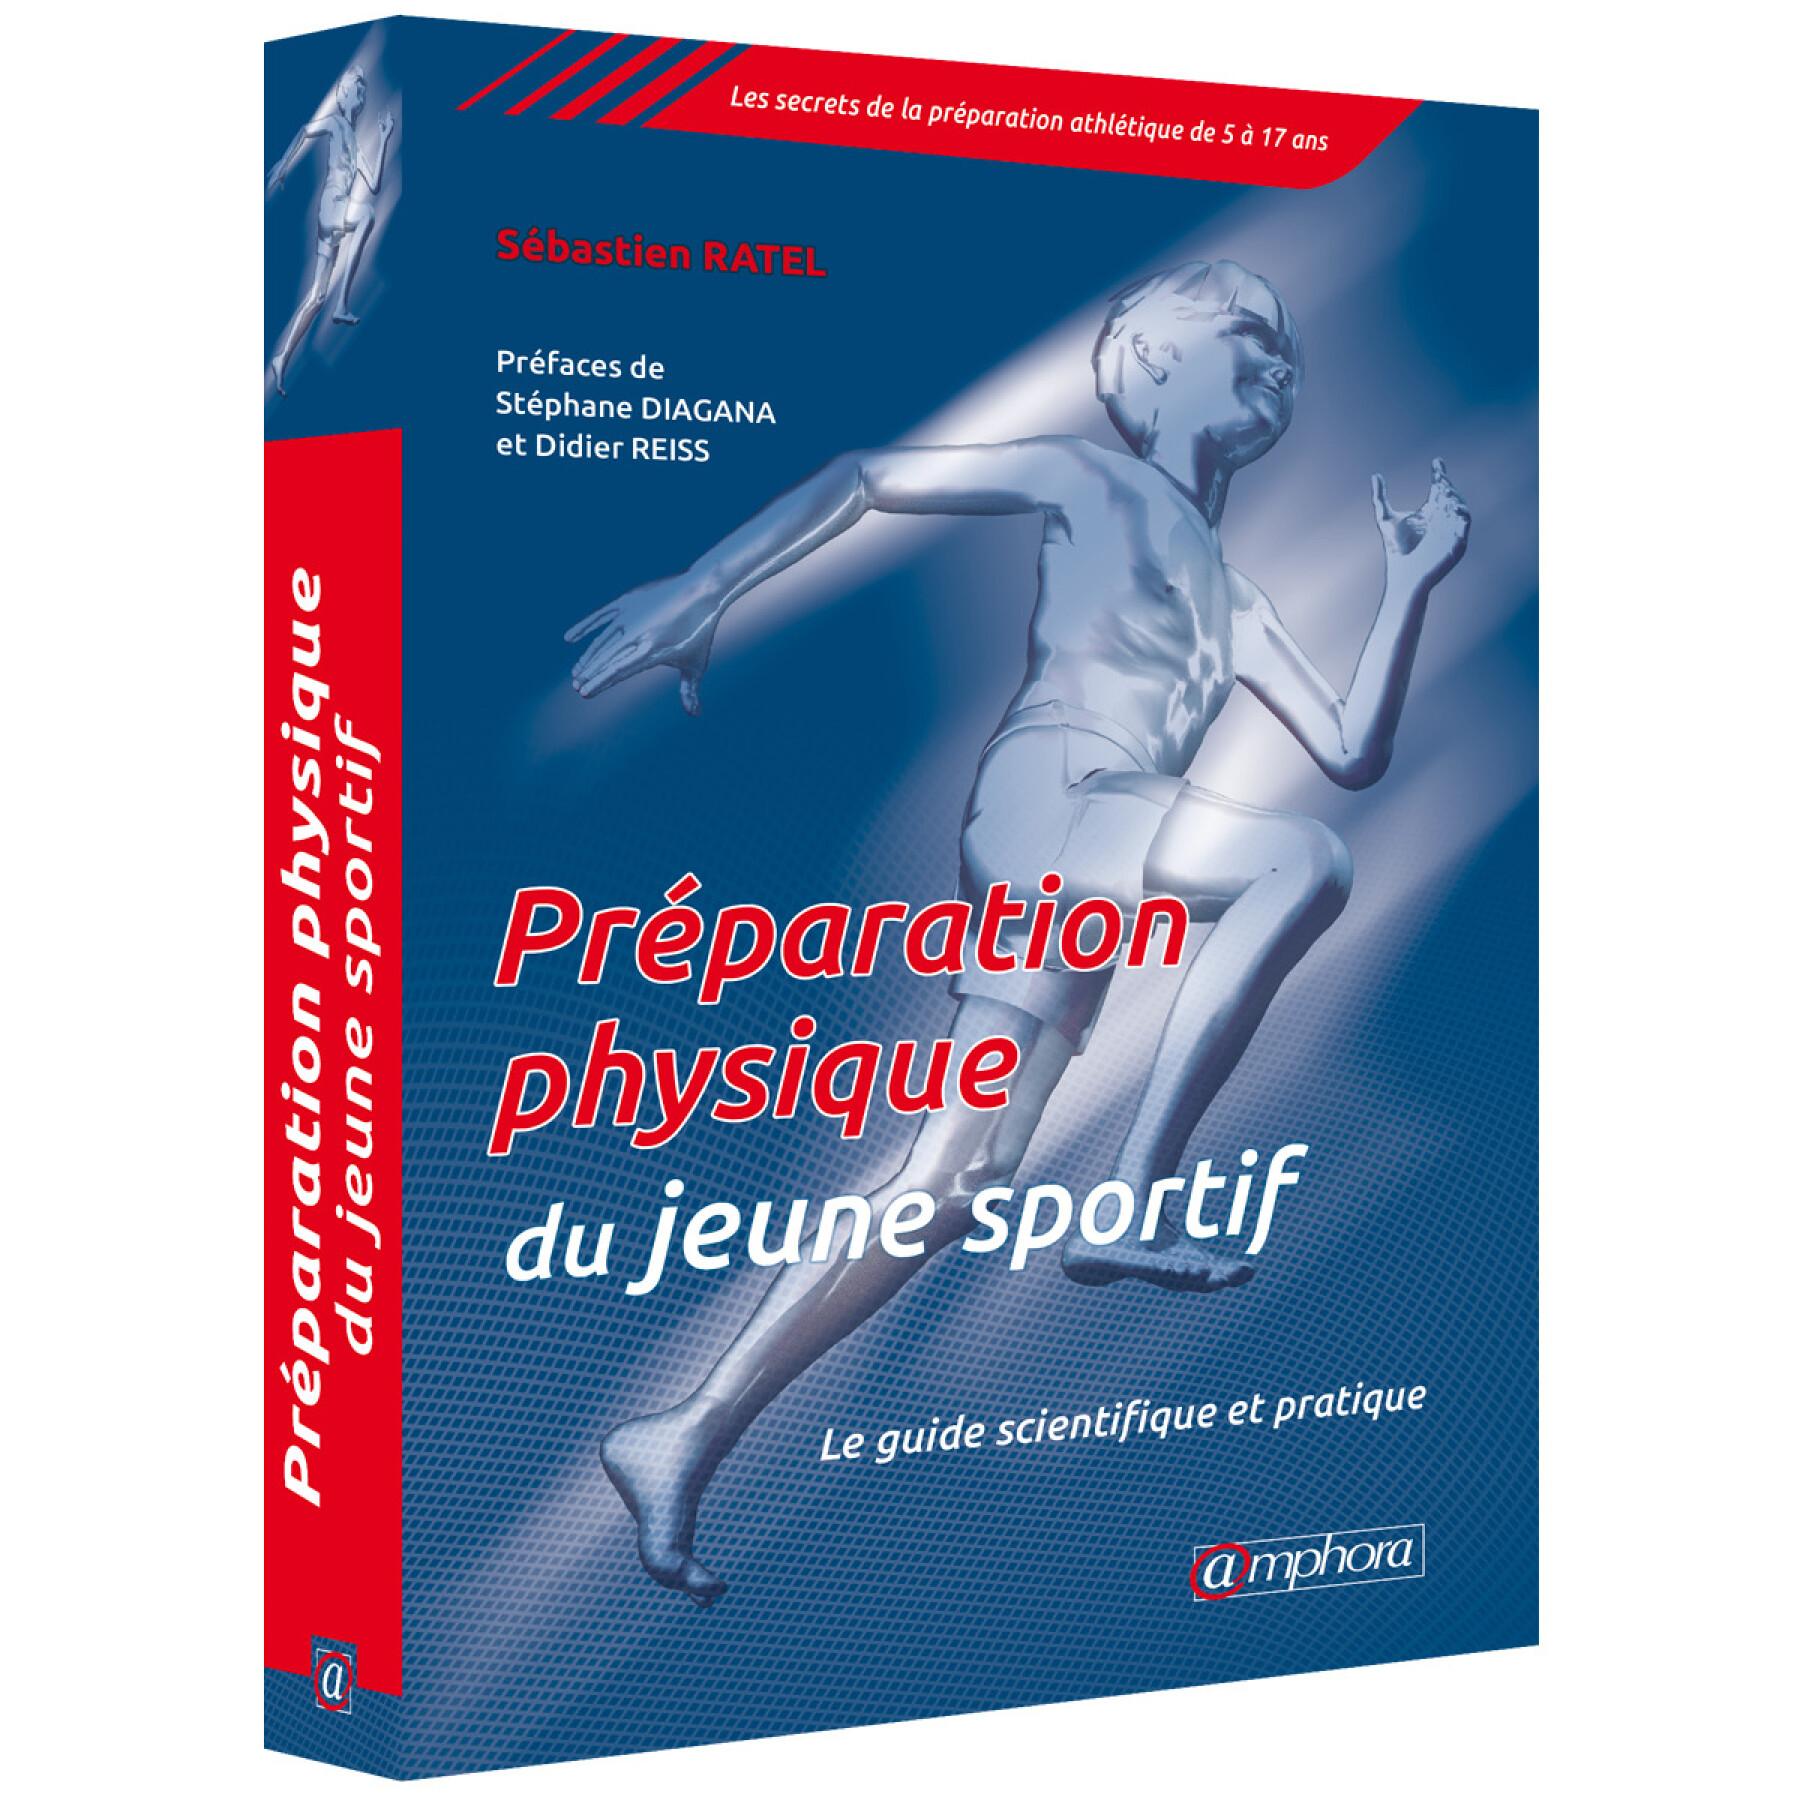 Book on physical preparation of young athletes Amphora